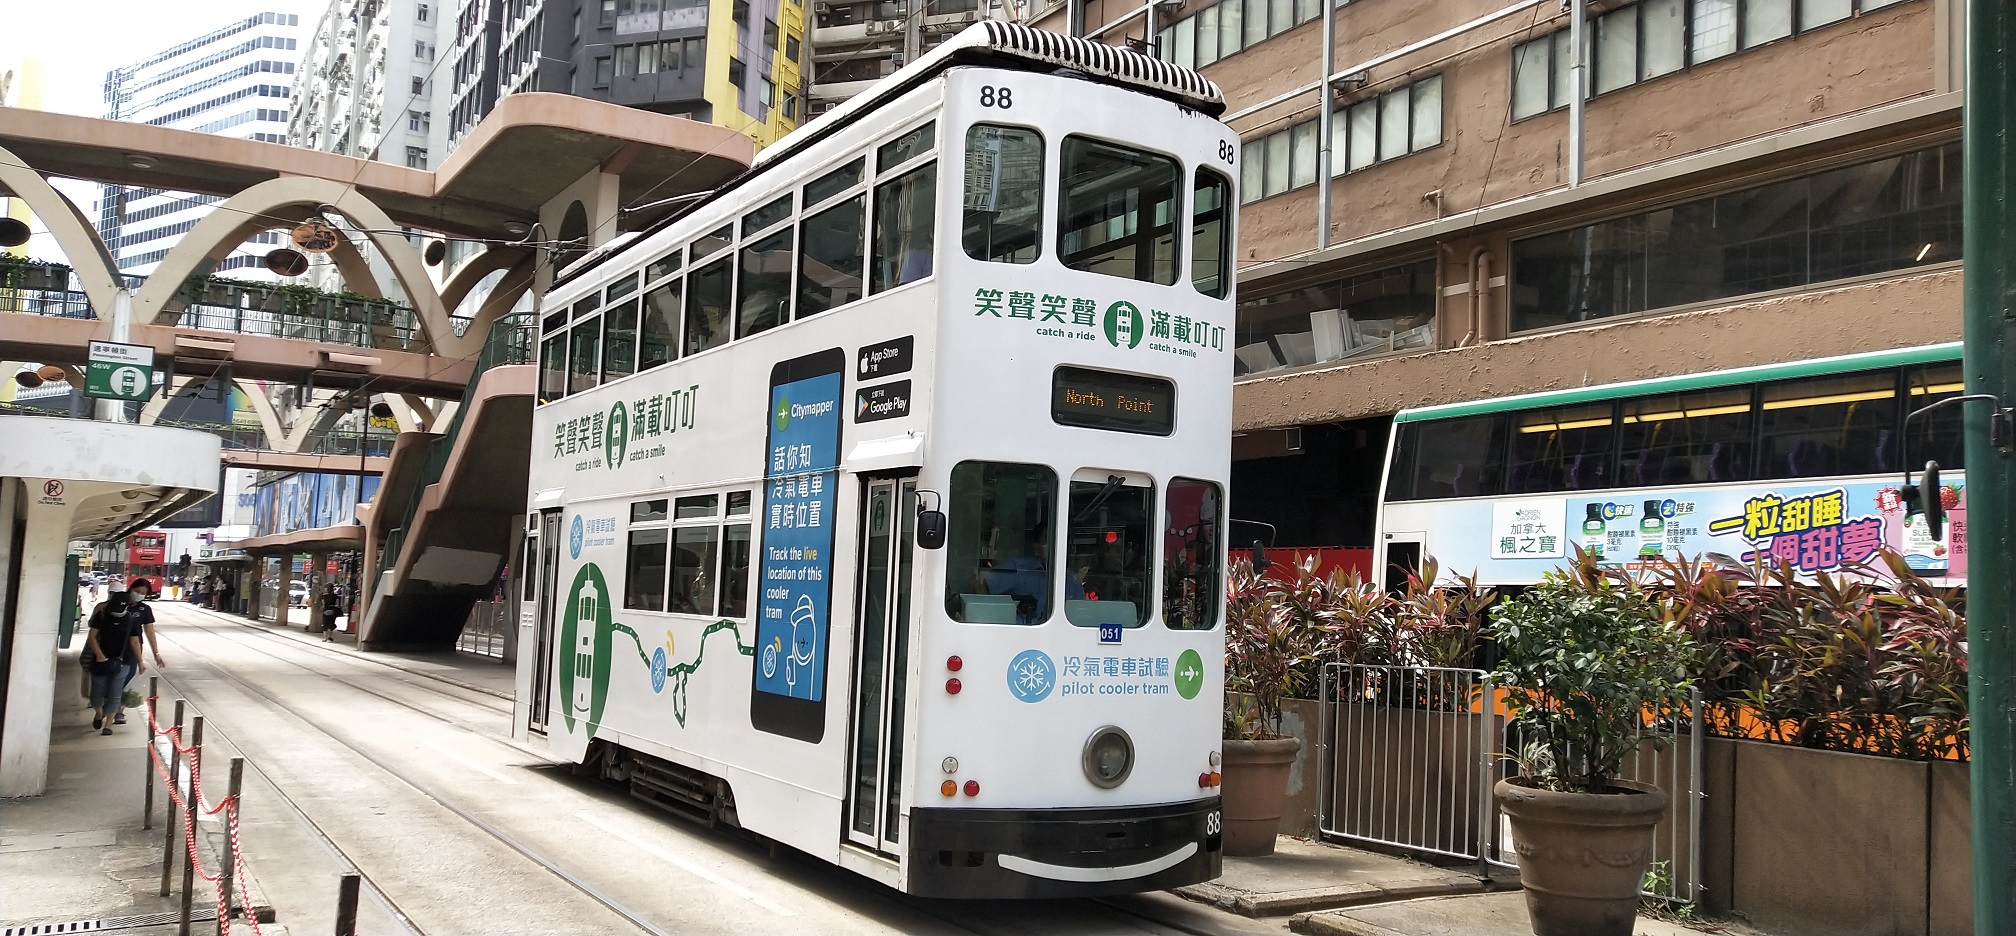 Air-conditioned double decker tram in Causeway Bay